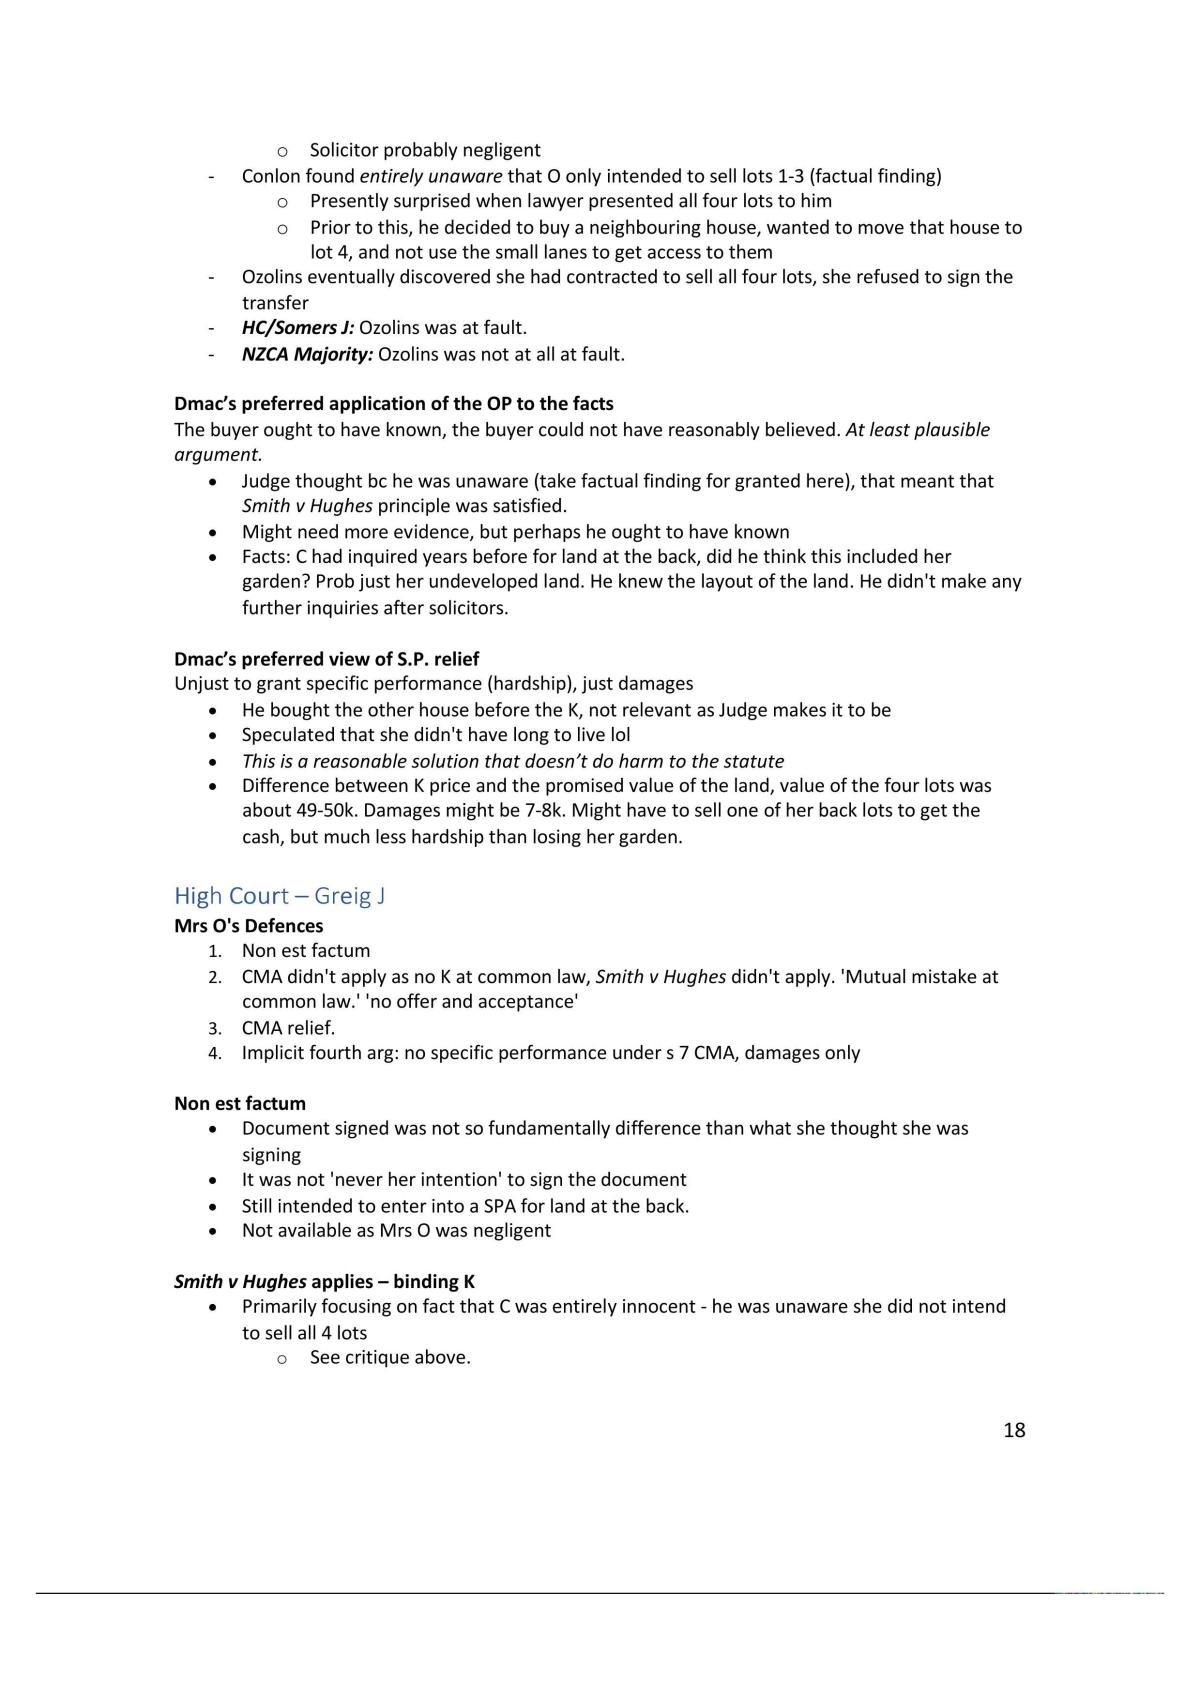 The Law of Contract Study Notes on Mistake - Page 18